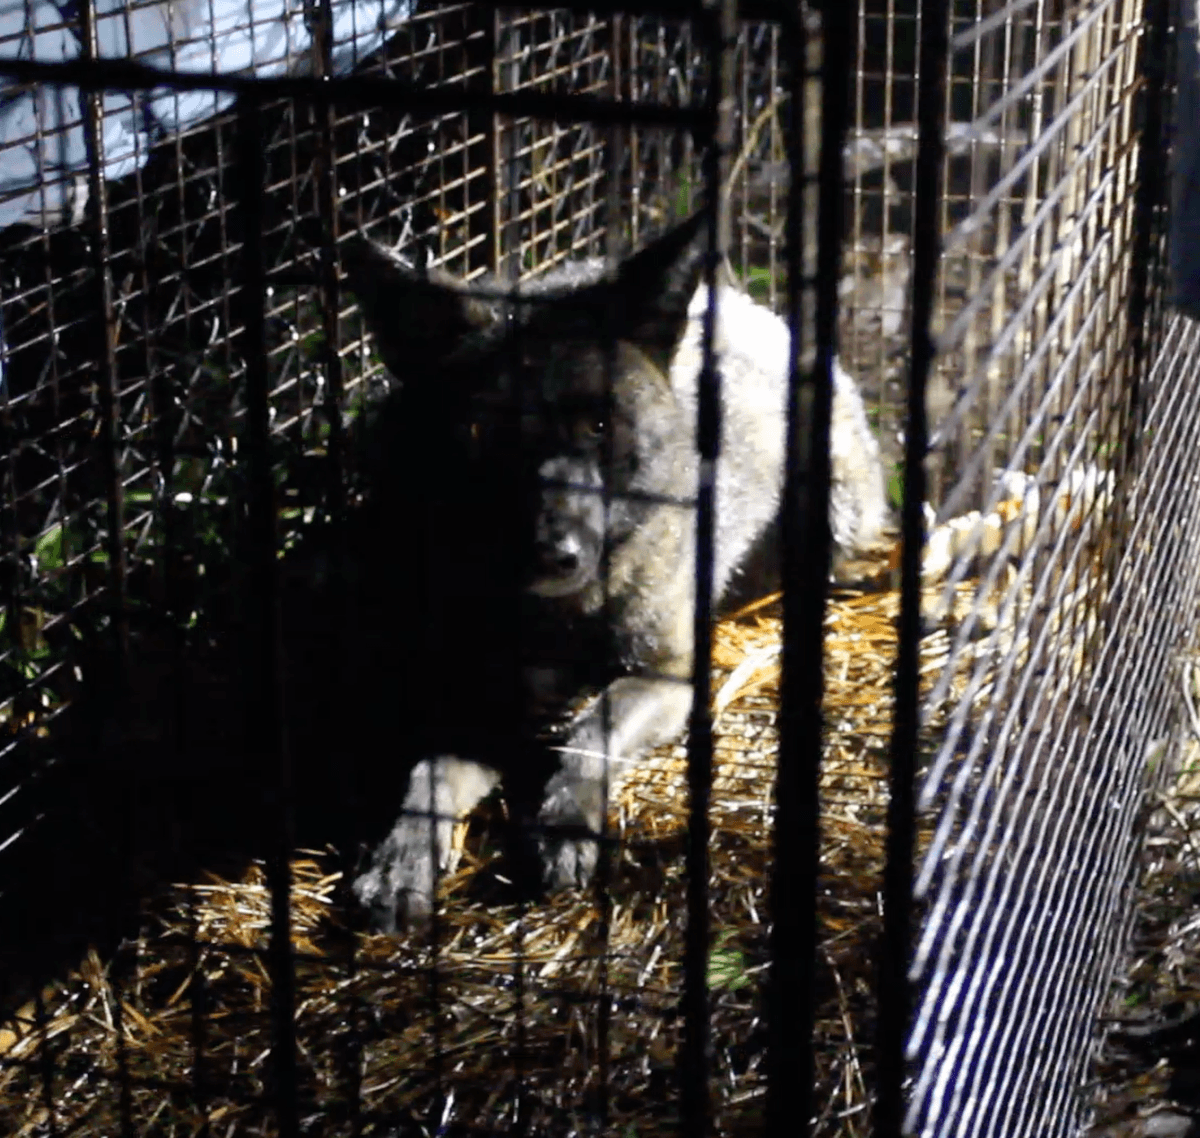 Carmine after he was captured in a trap. (Courtesy of Brandon Sanders/<a href="http://www.sanderswildlife.com/contact-us">Sanders Wildlife</a>)